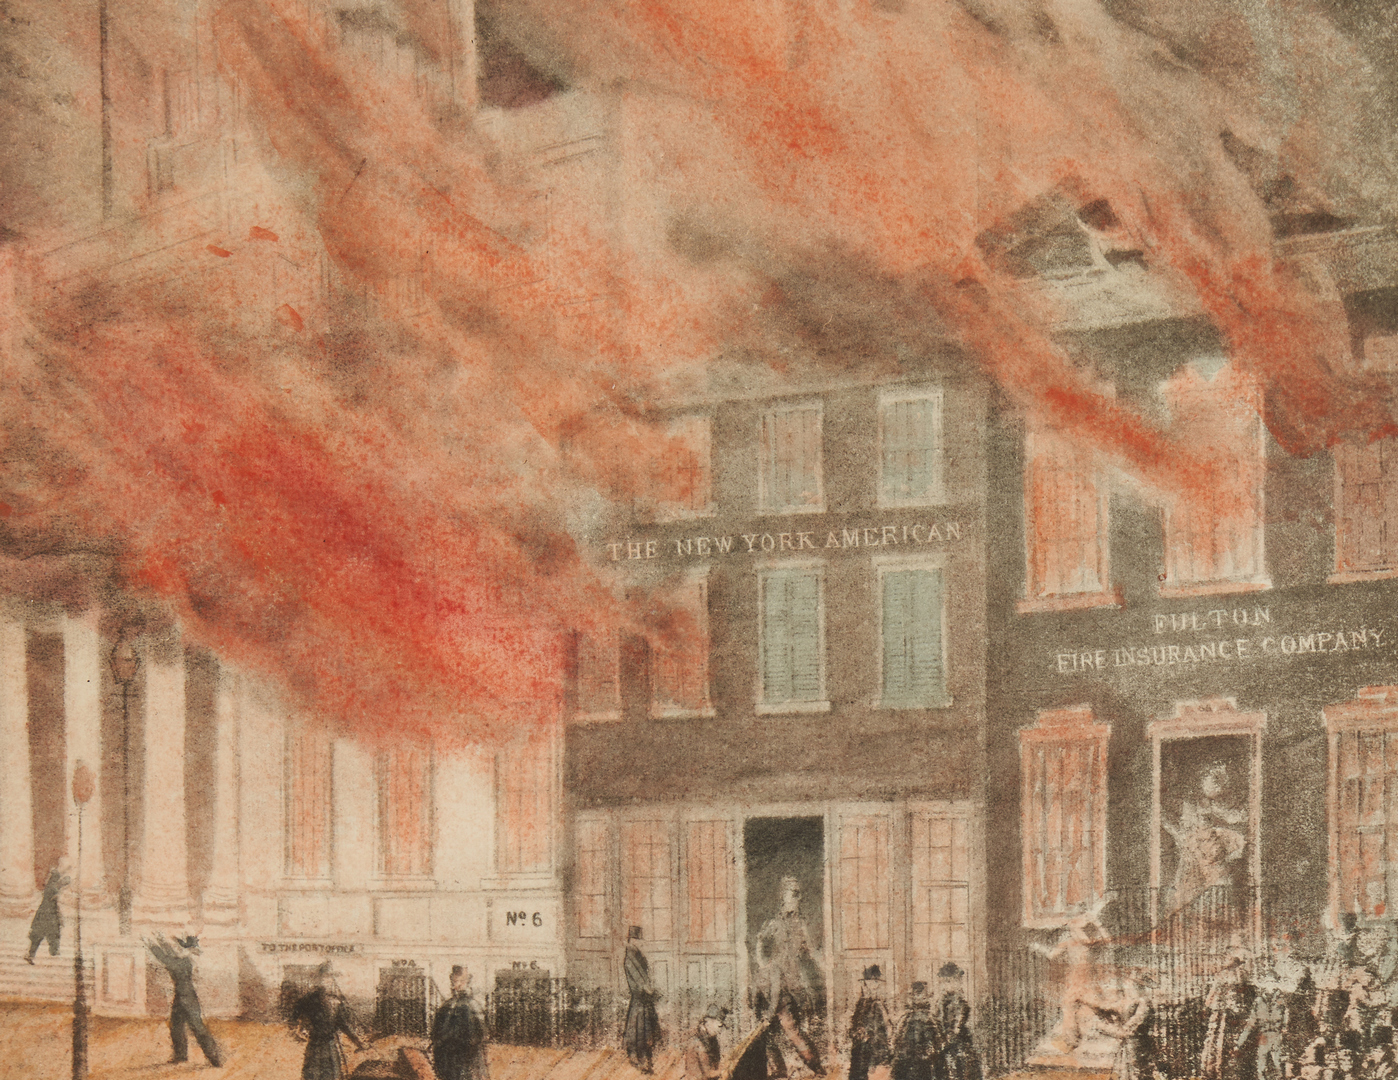 Lot 128: Burning of the NY Merchant's Exchange, 1909 lithograph